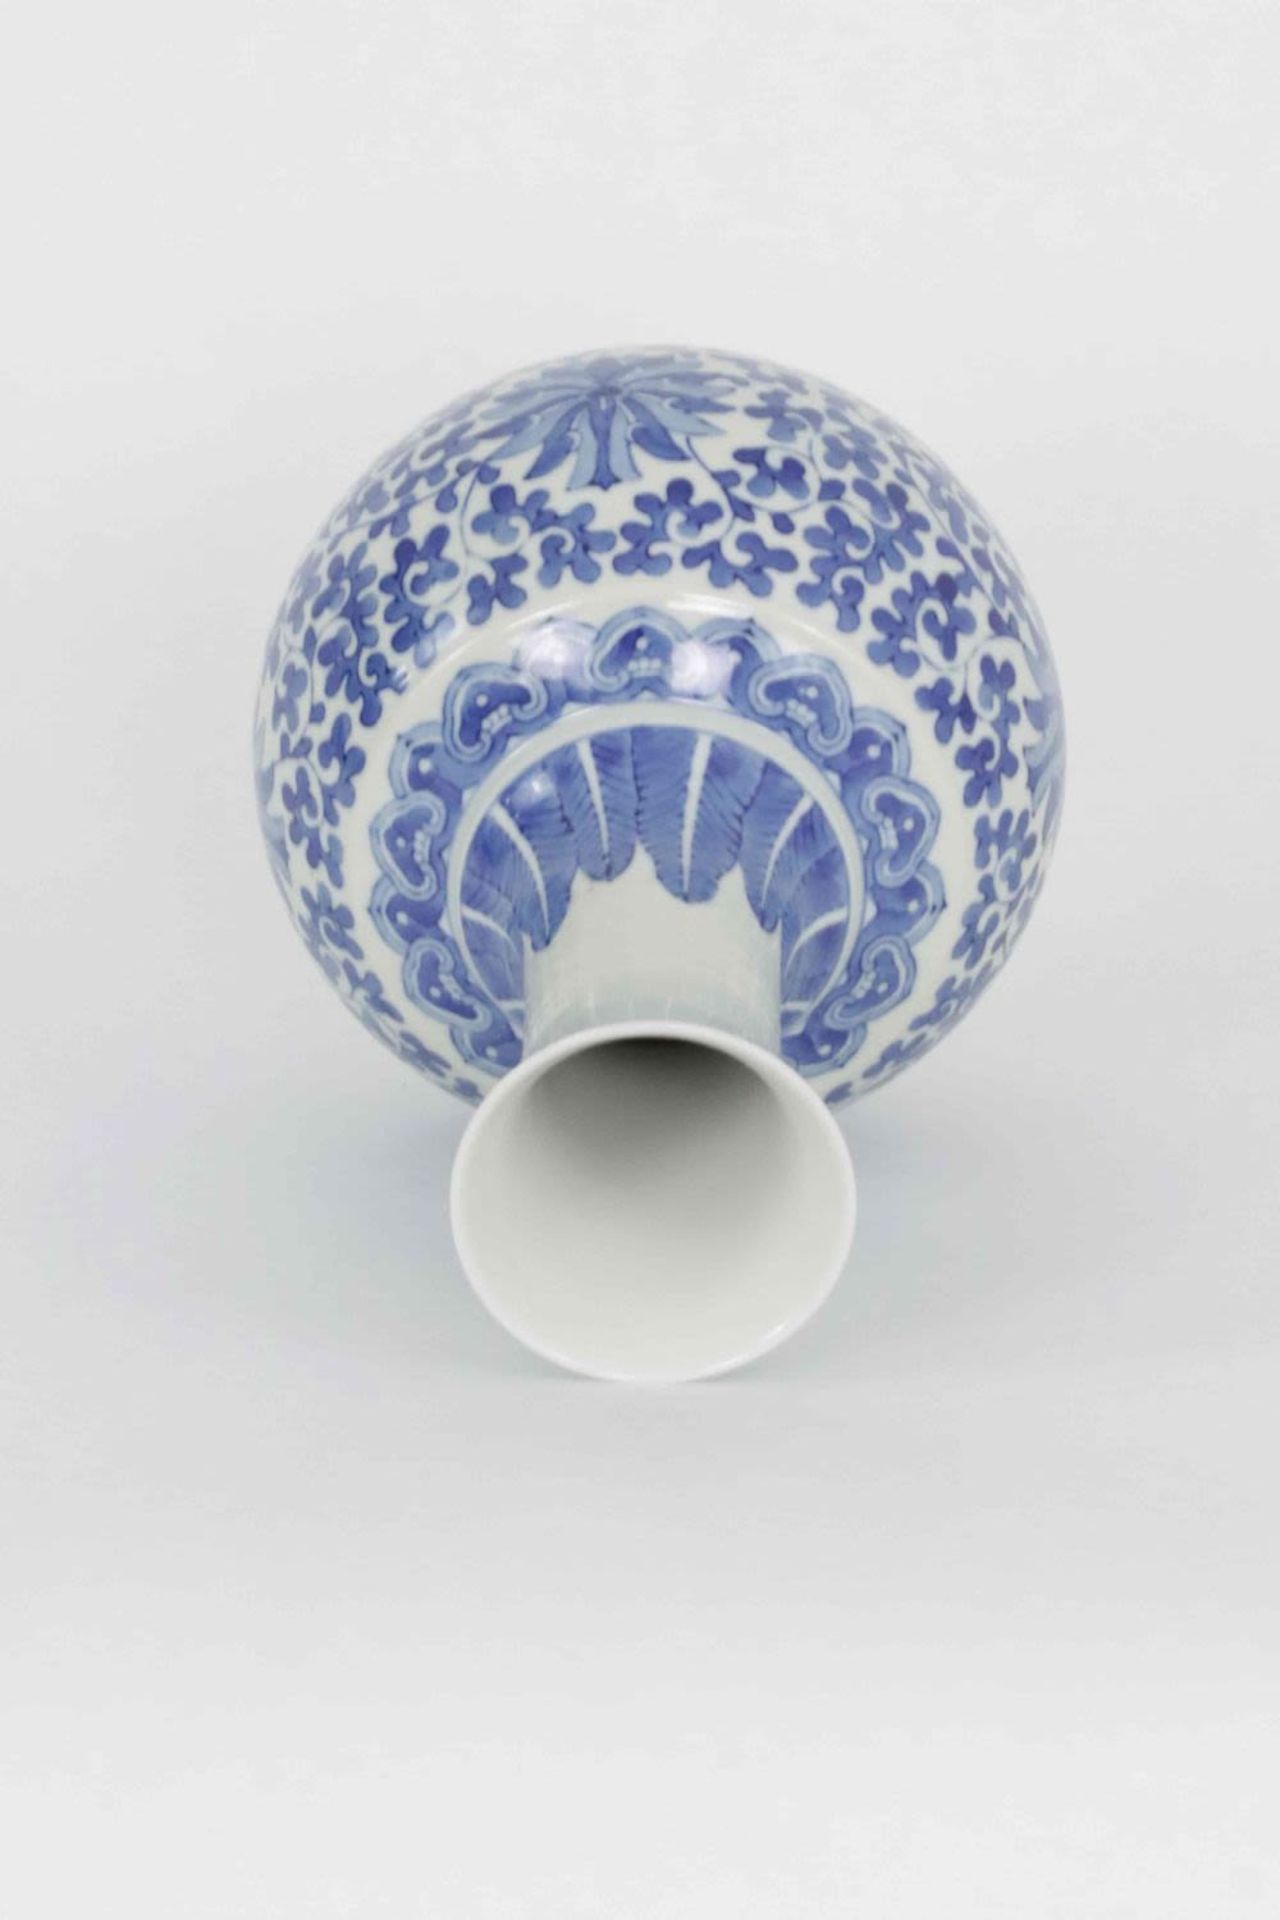 A Chinese blue and white Ming style bottle vase, 20th Century - Image 3 of 3